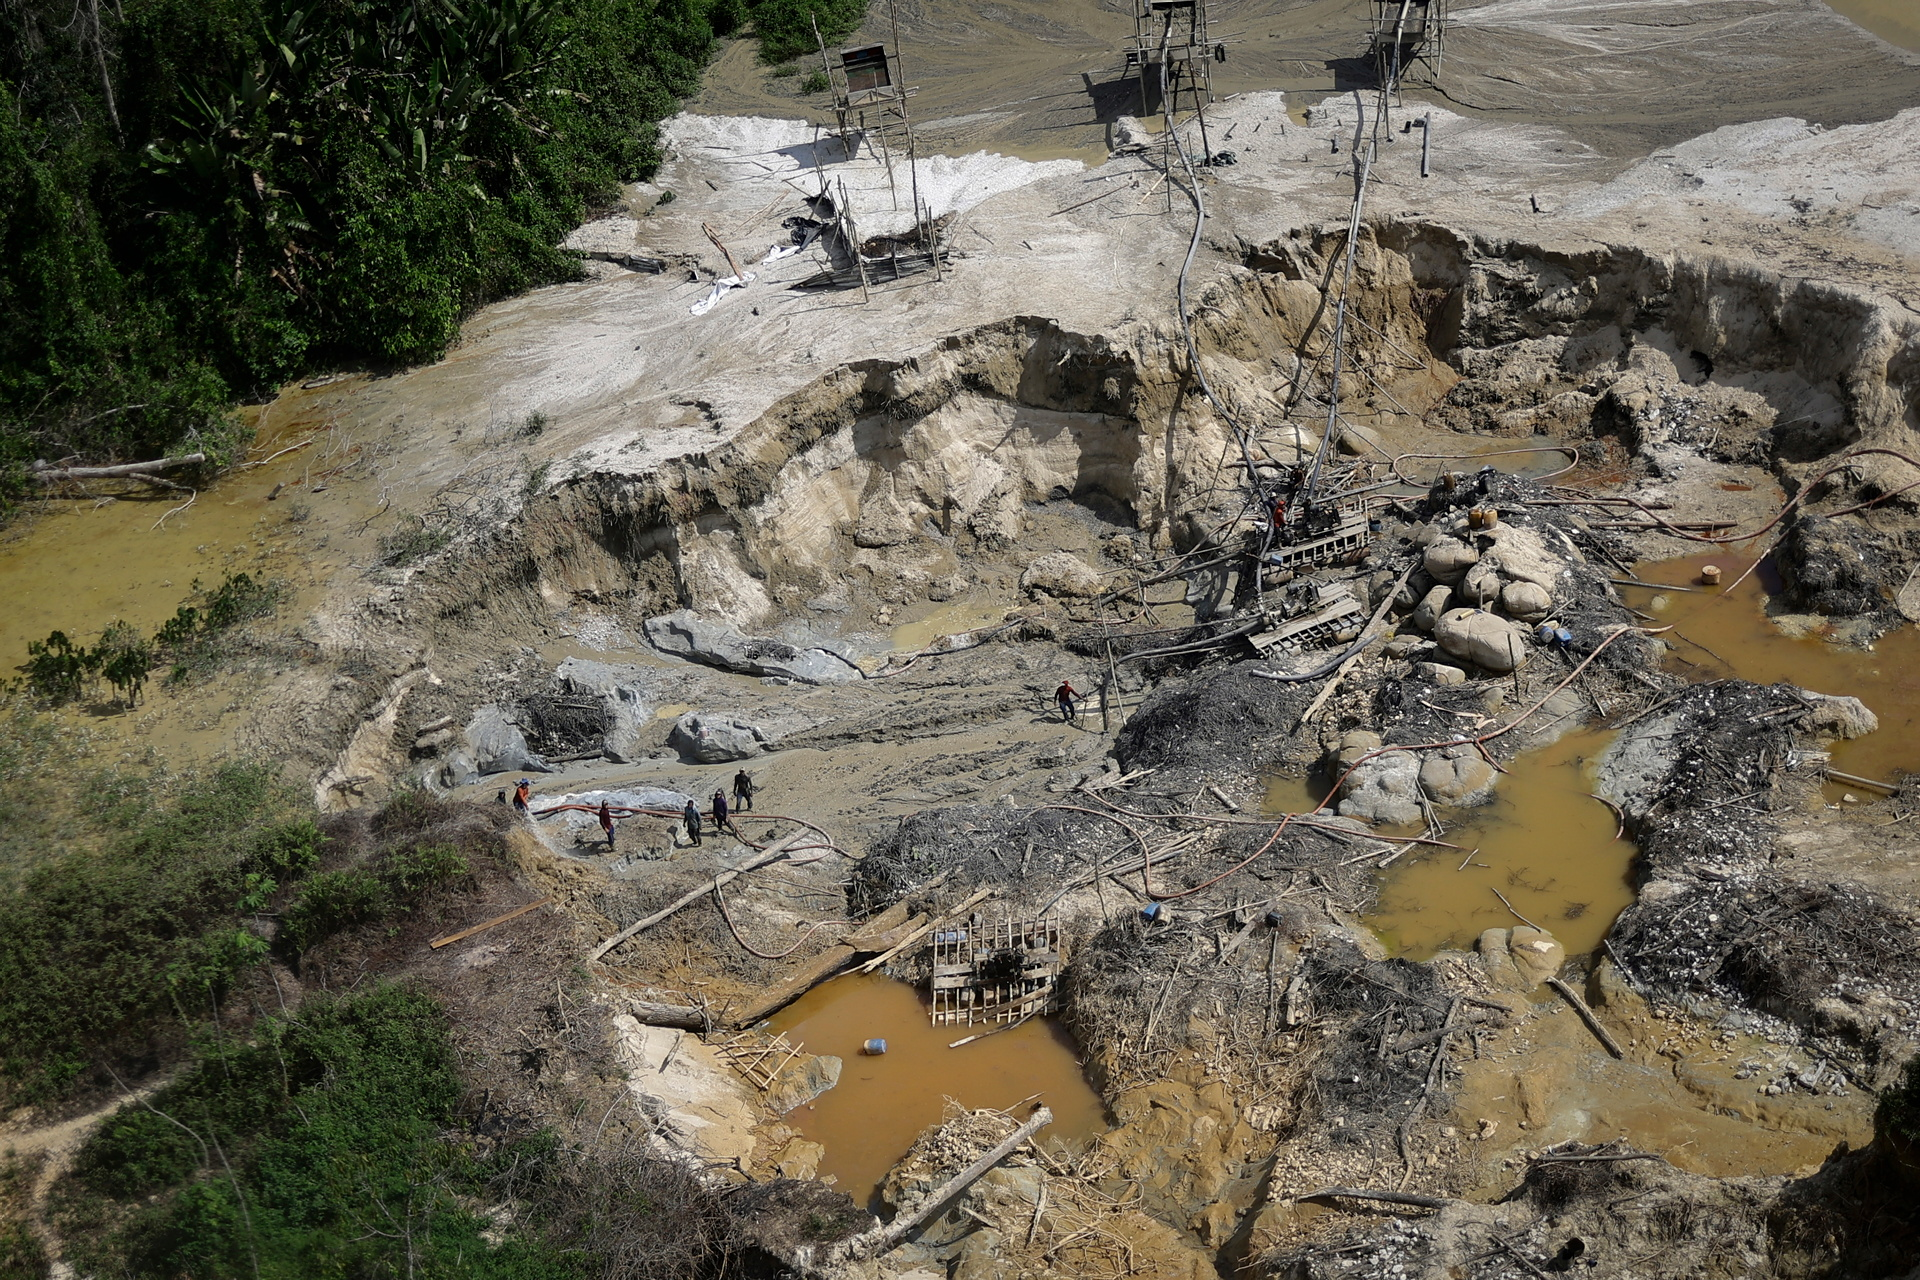 Aerial view of illegal miners using jets of water to dig for gold, damaging the soil by the edge of the Couto de Magalhaes river, during an operation by members of Ibama’s Special Inspection Group against illegal mining in Yanomami Indigenous land, Brazil, 3 December 2023. Photo: Ueslei Marcelino / REUTERS